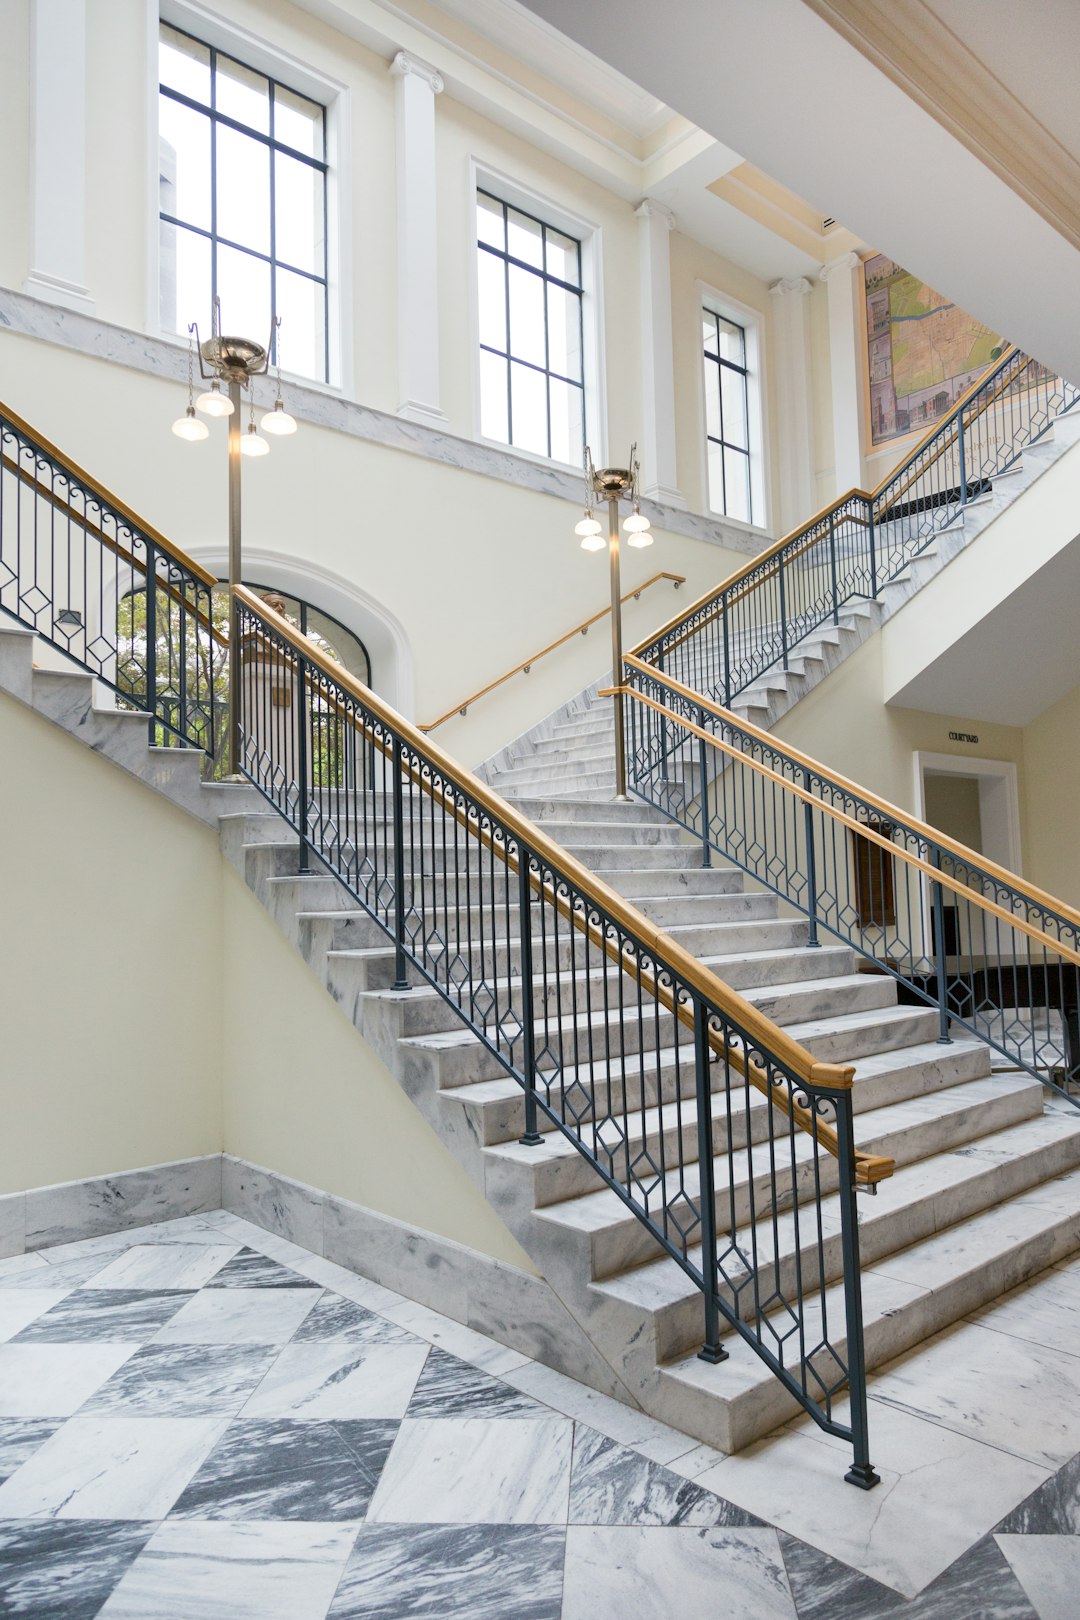 A wide staircase in the lobby of an American style school building, with marble steps and black metal railings leading to two floors above and below. The walls feature classical architecture elements and large windows, providing natural light for indoor lighting. A warm yellow ceiling adds warmth to the space. This scene is captured in the style of professional photographers using high-definition cameras and precise lenses.